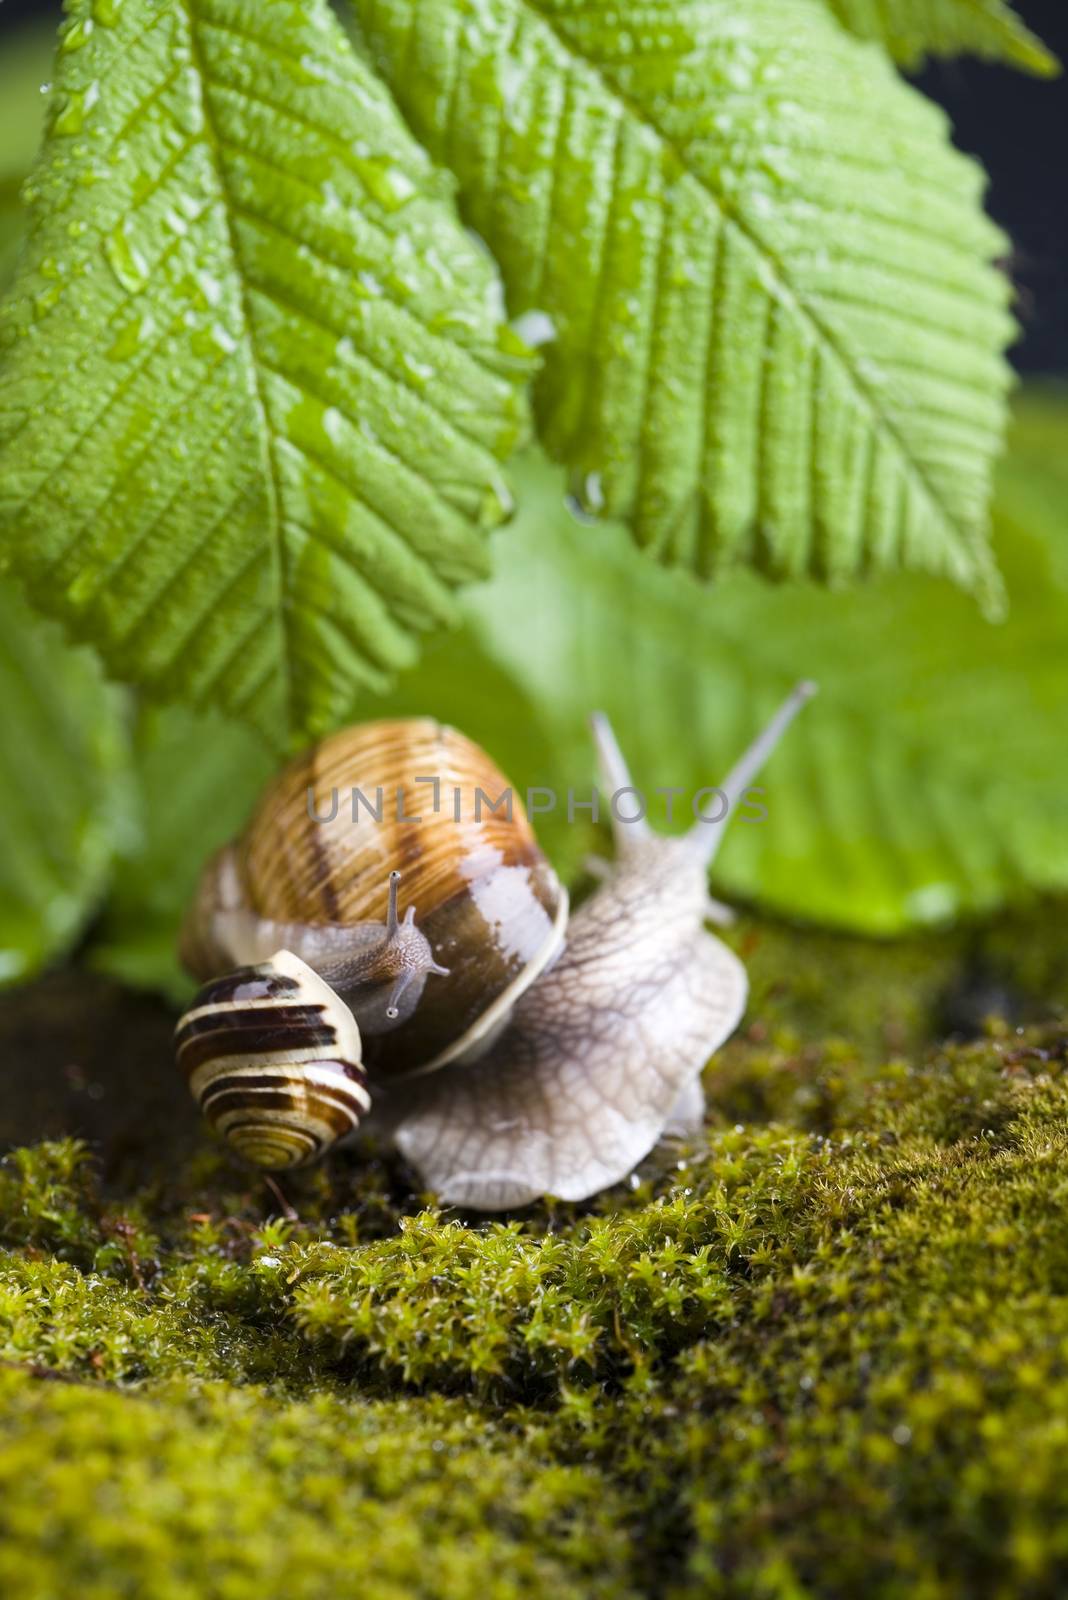 Snail on moss, natural concept saturated colors